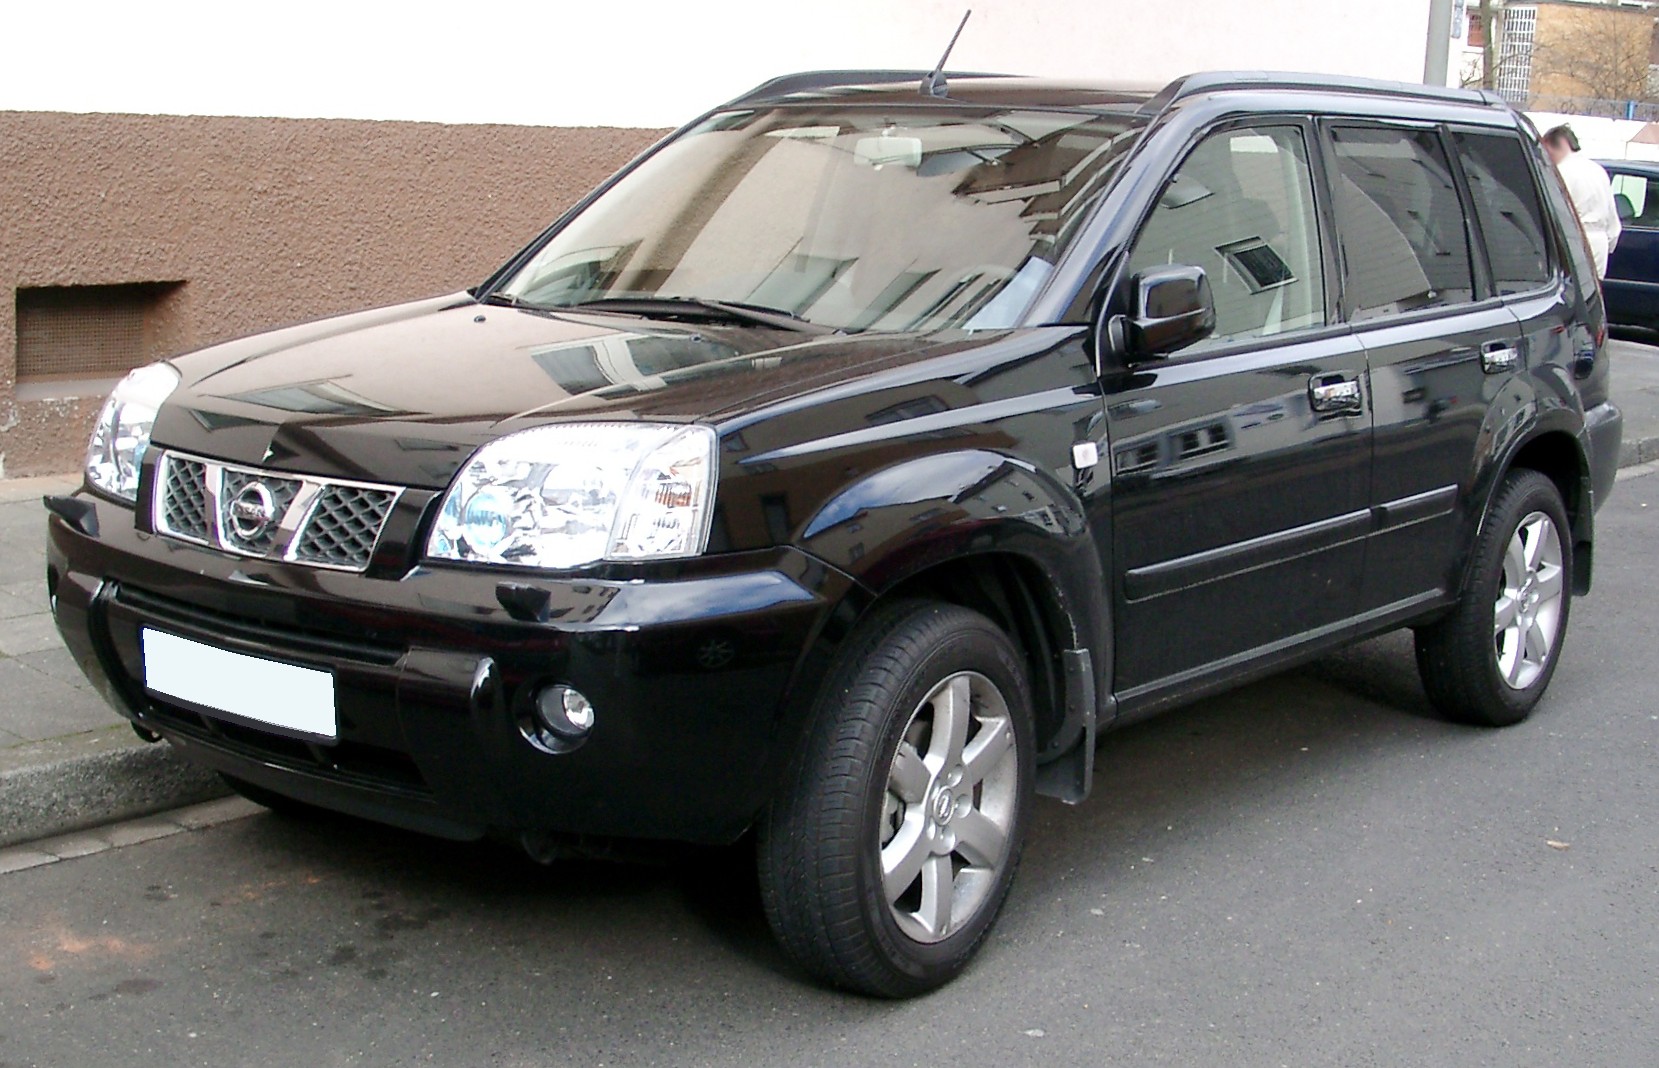 File:Nissan X-Trail front 20080131.jpg - Wikimedia Commons